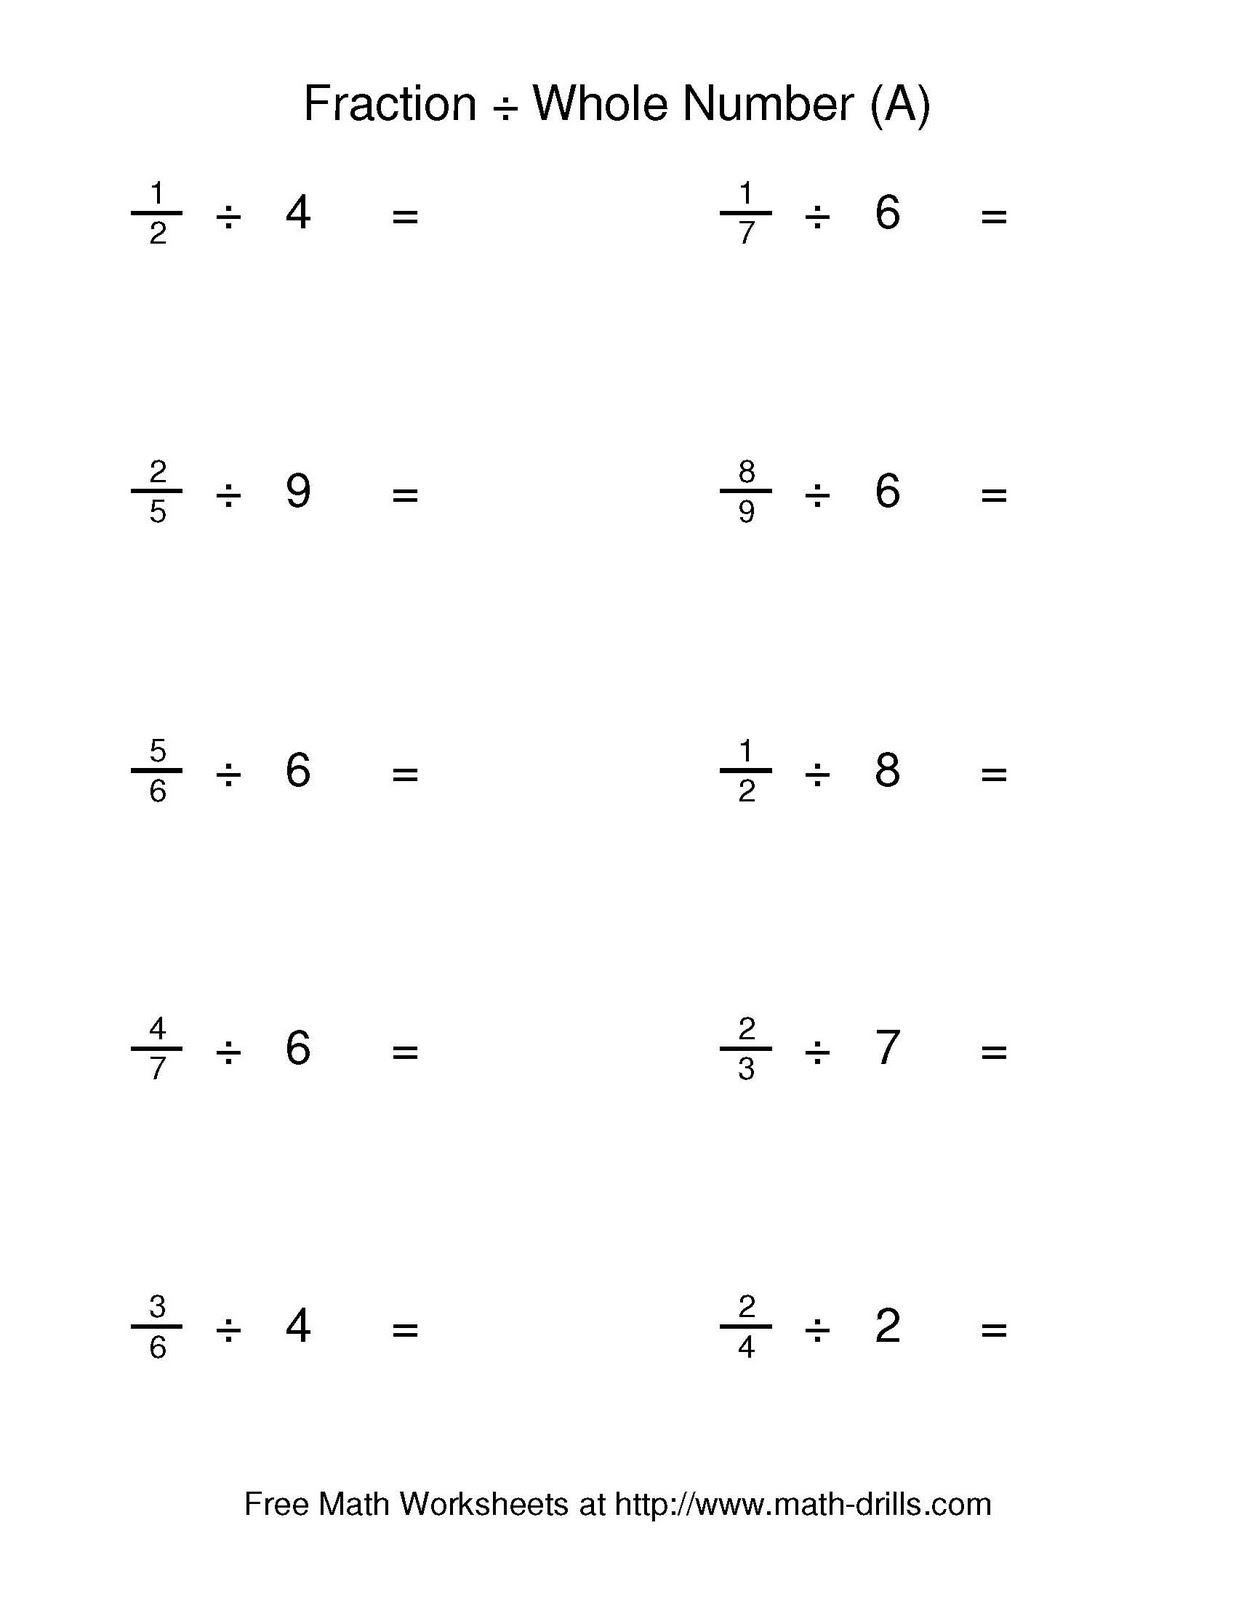 dividing-unit-fractions-by-whole-numbers